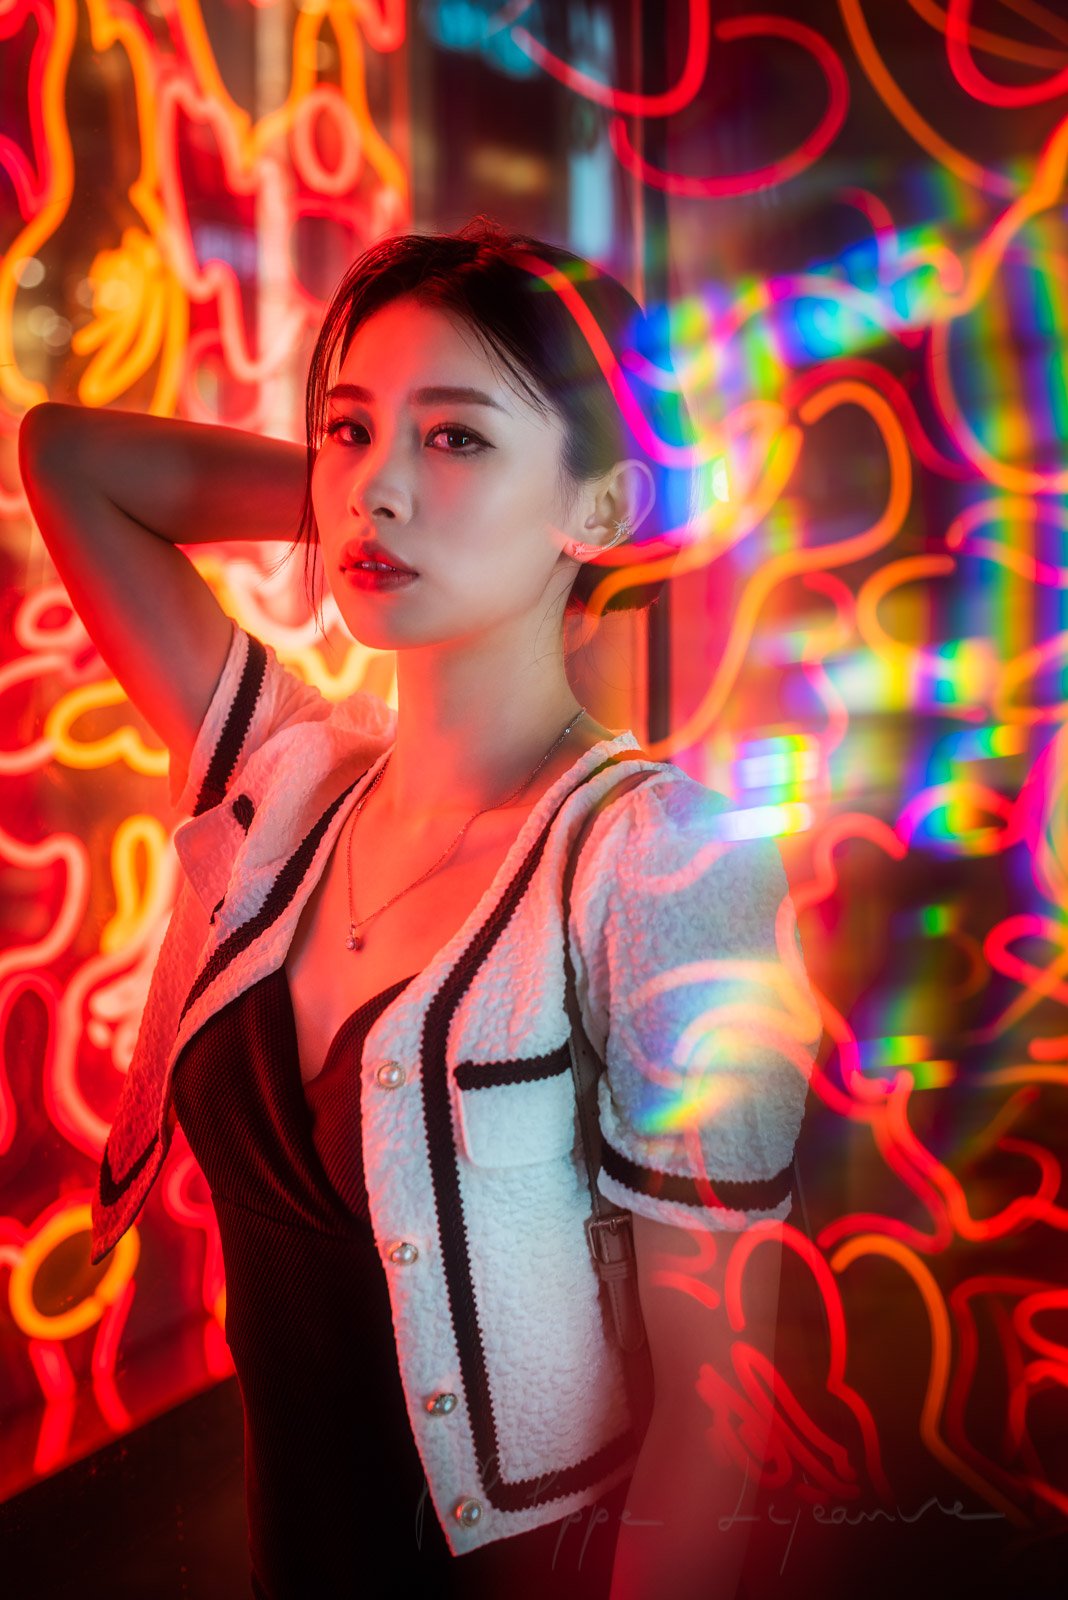 Young chinese woman standing next to red neon lights in Chengdu, Sichuan province, China